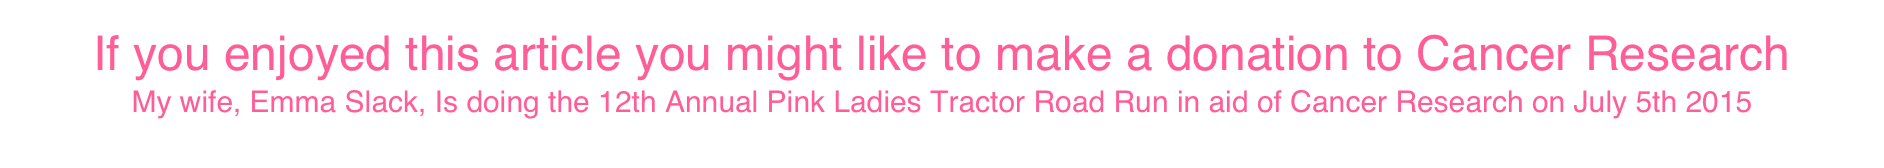 If you enjoyed this article you might like to make a donation to Cancer Research
My wife, Emma Slack, Is doing the 12th Annual Pink Ladies Tractor Road Run in aid of Cancer Research on July 5th 2015
